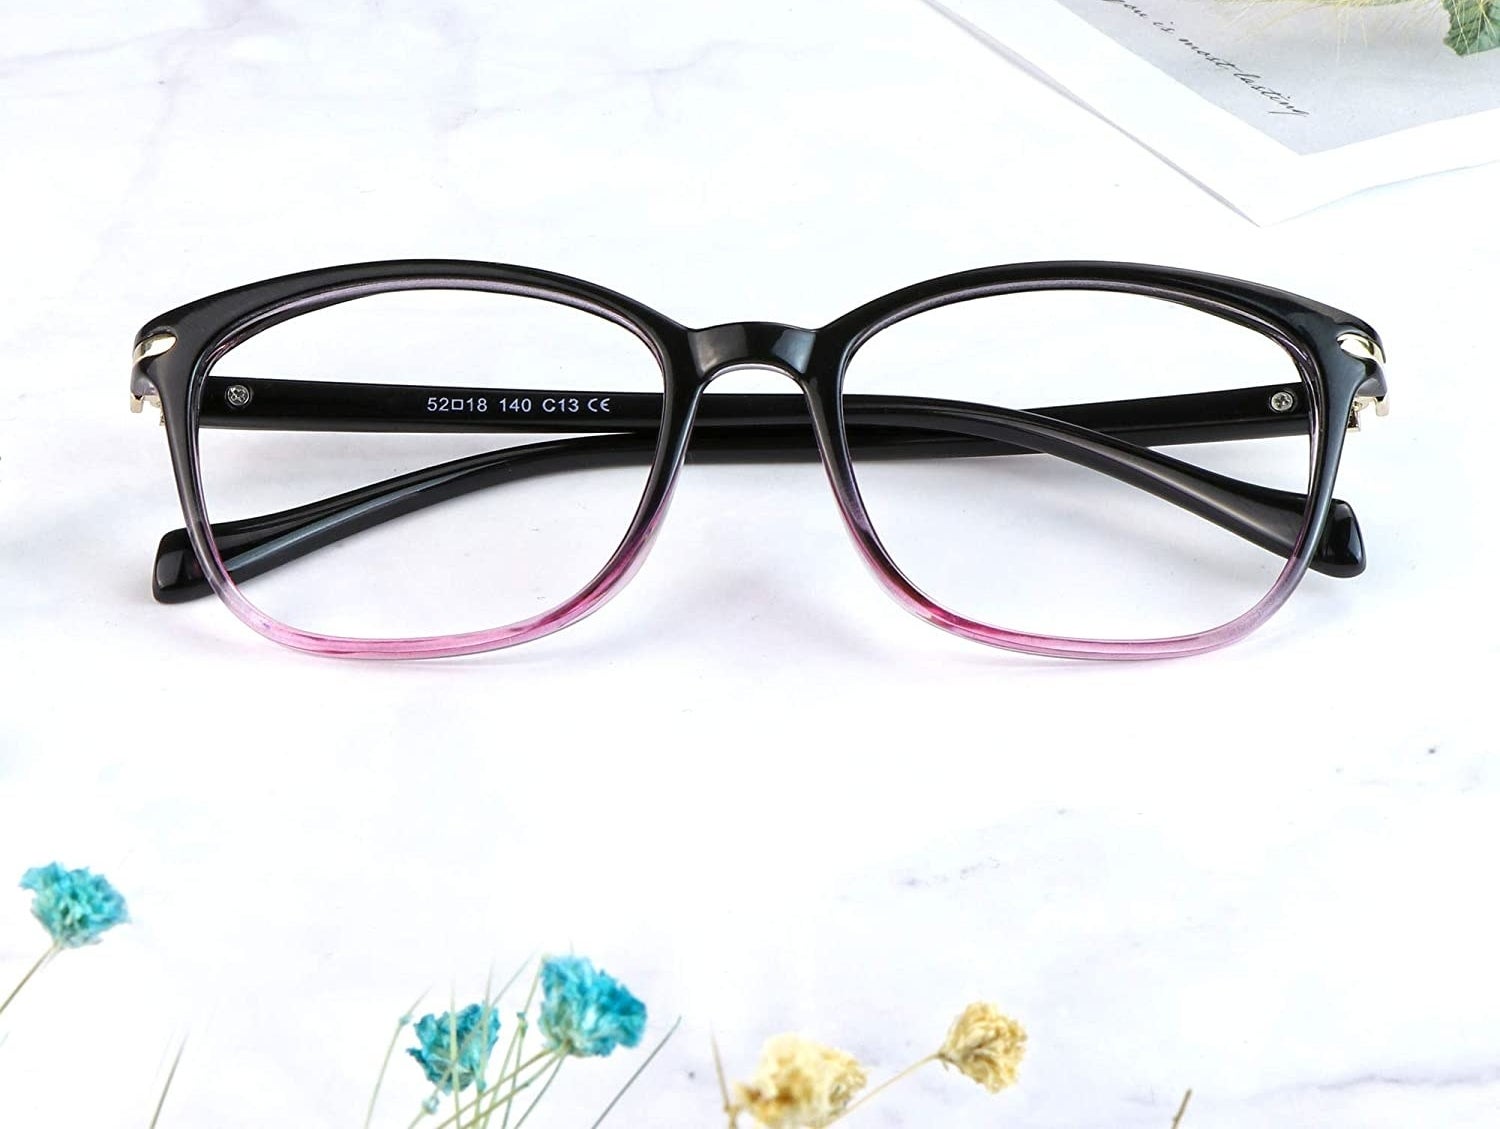 A pair of glasses on a plain background